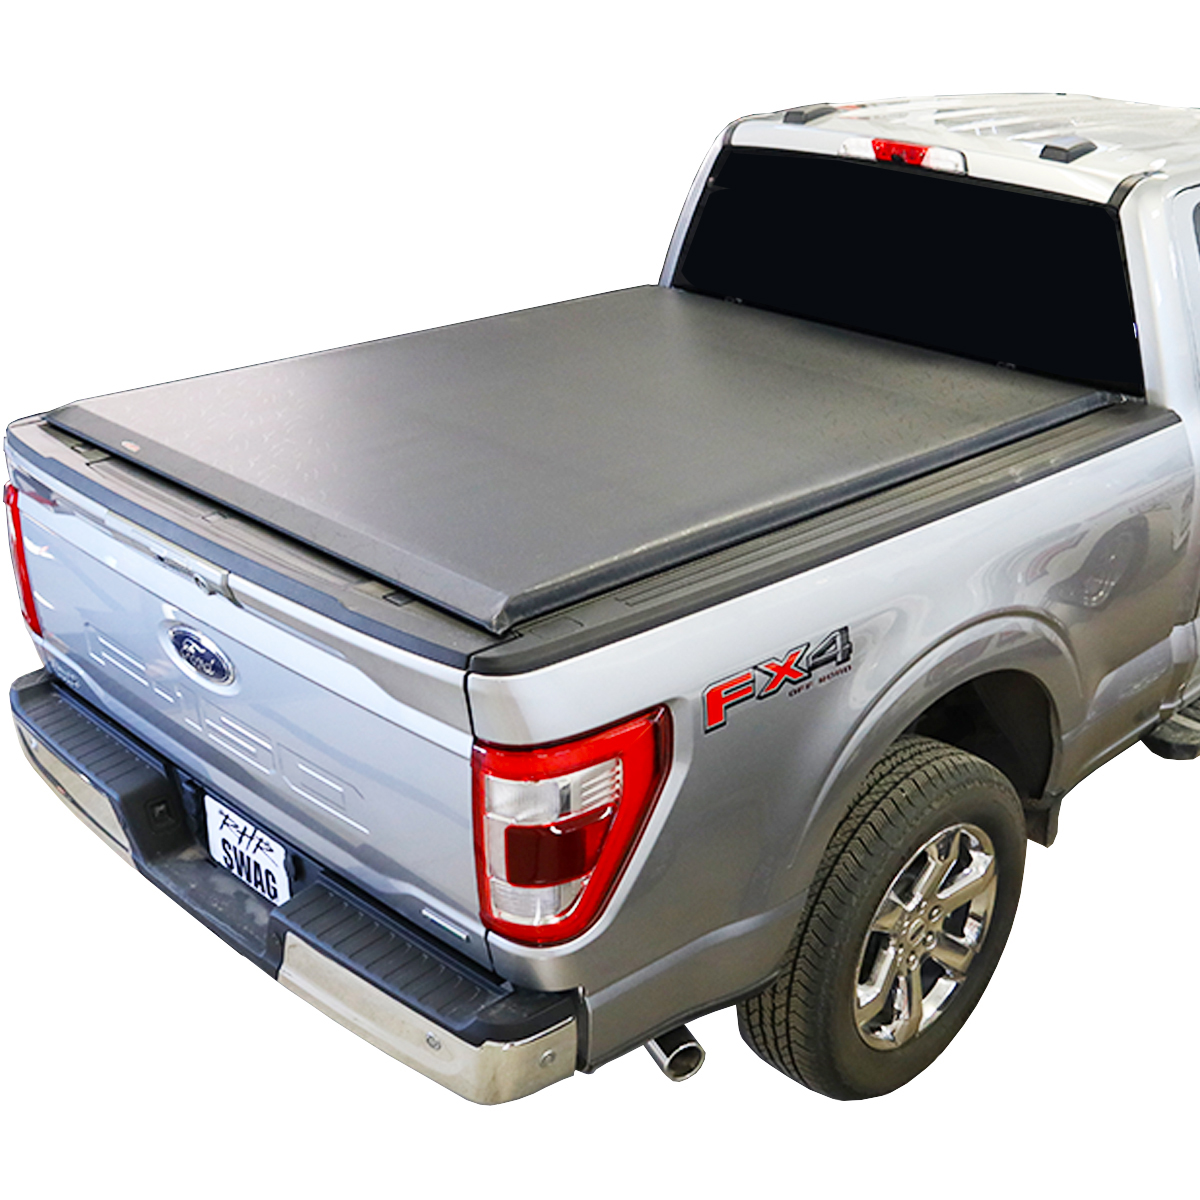 RHR AA Battery Powered Truck Bed Cargo LED Lights